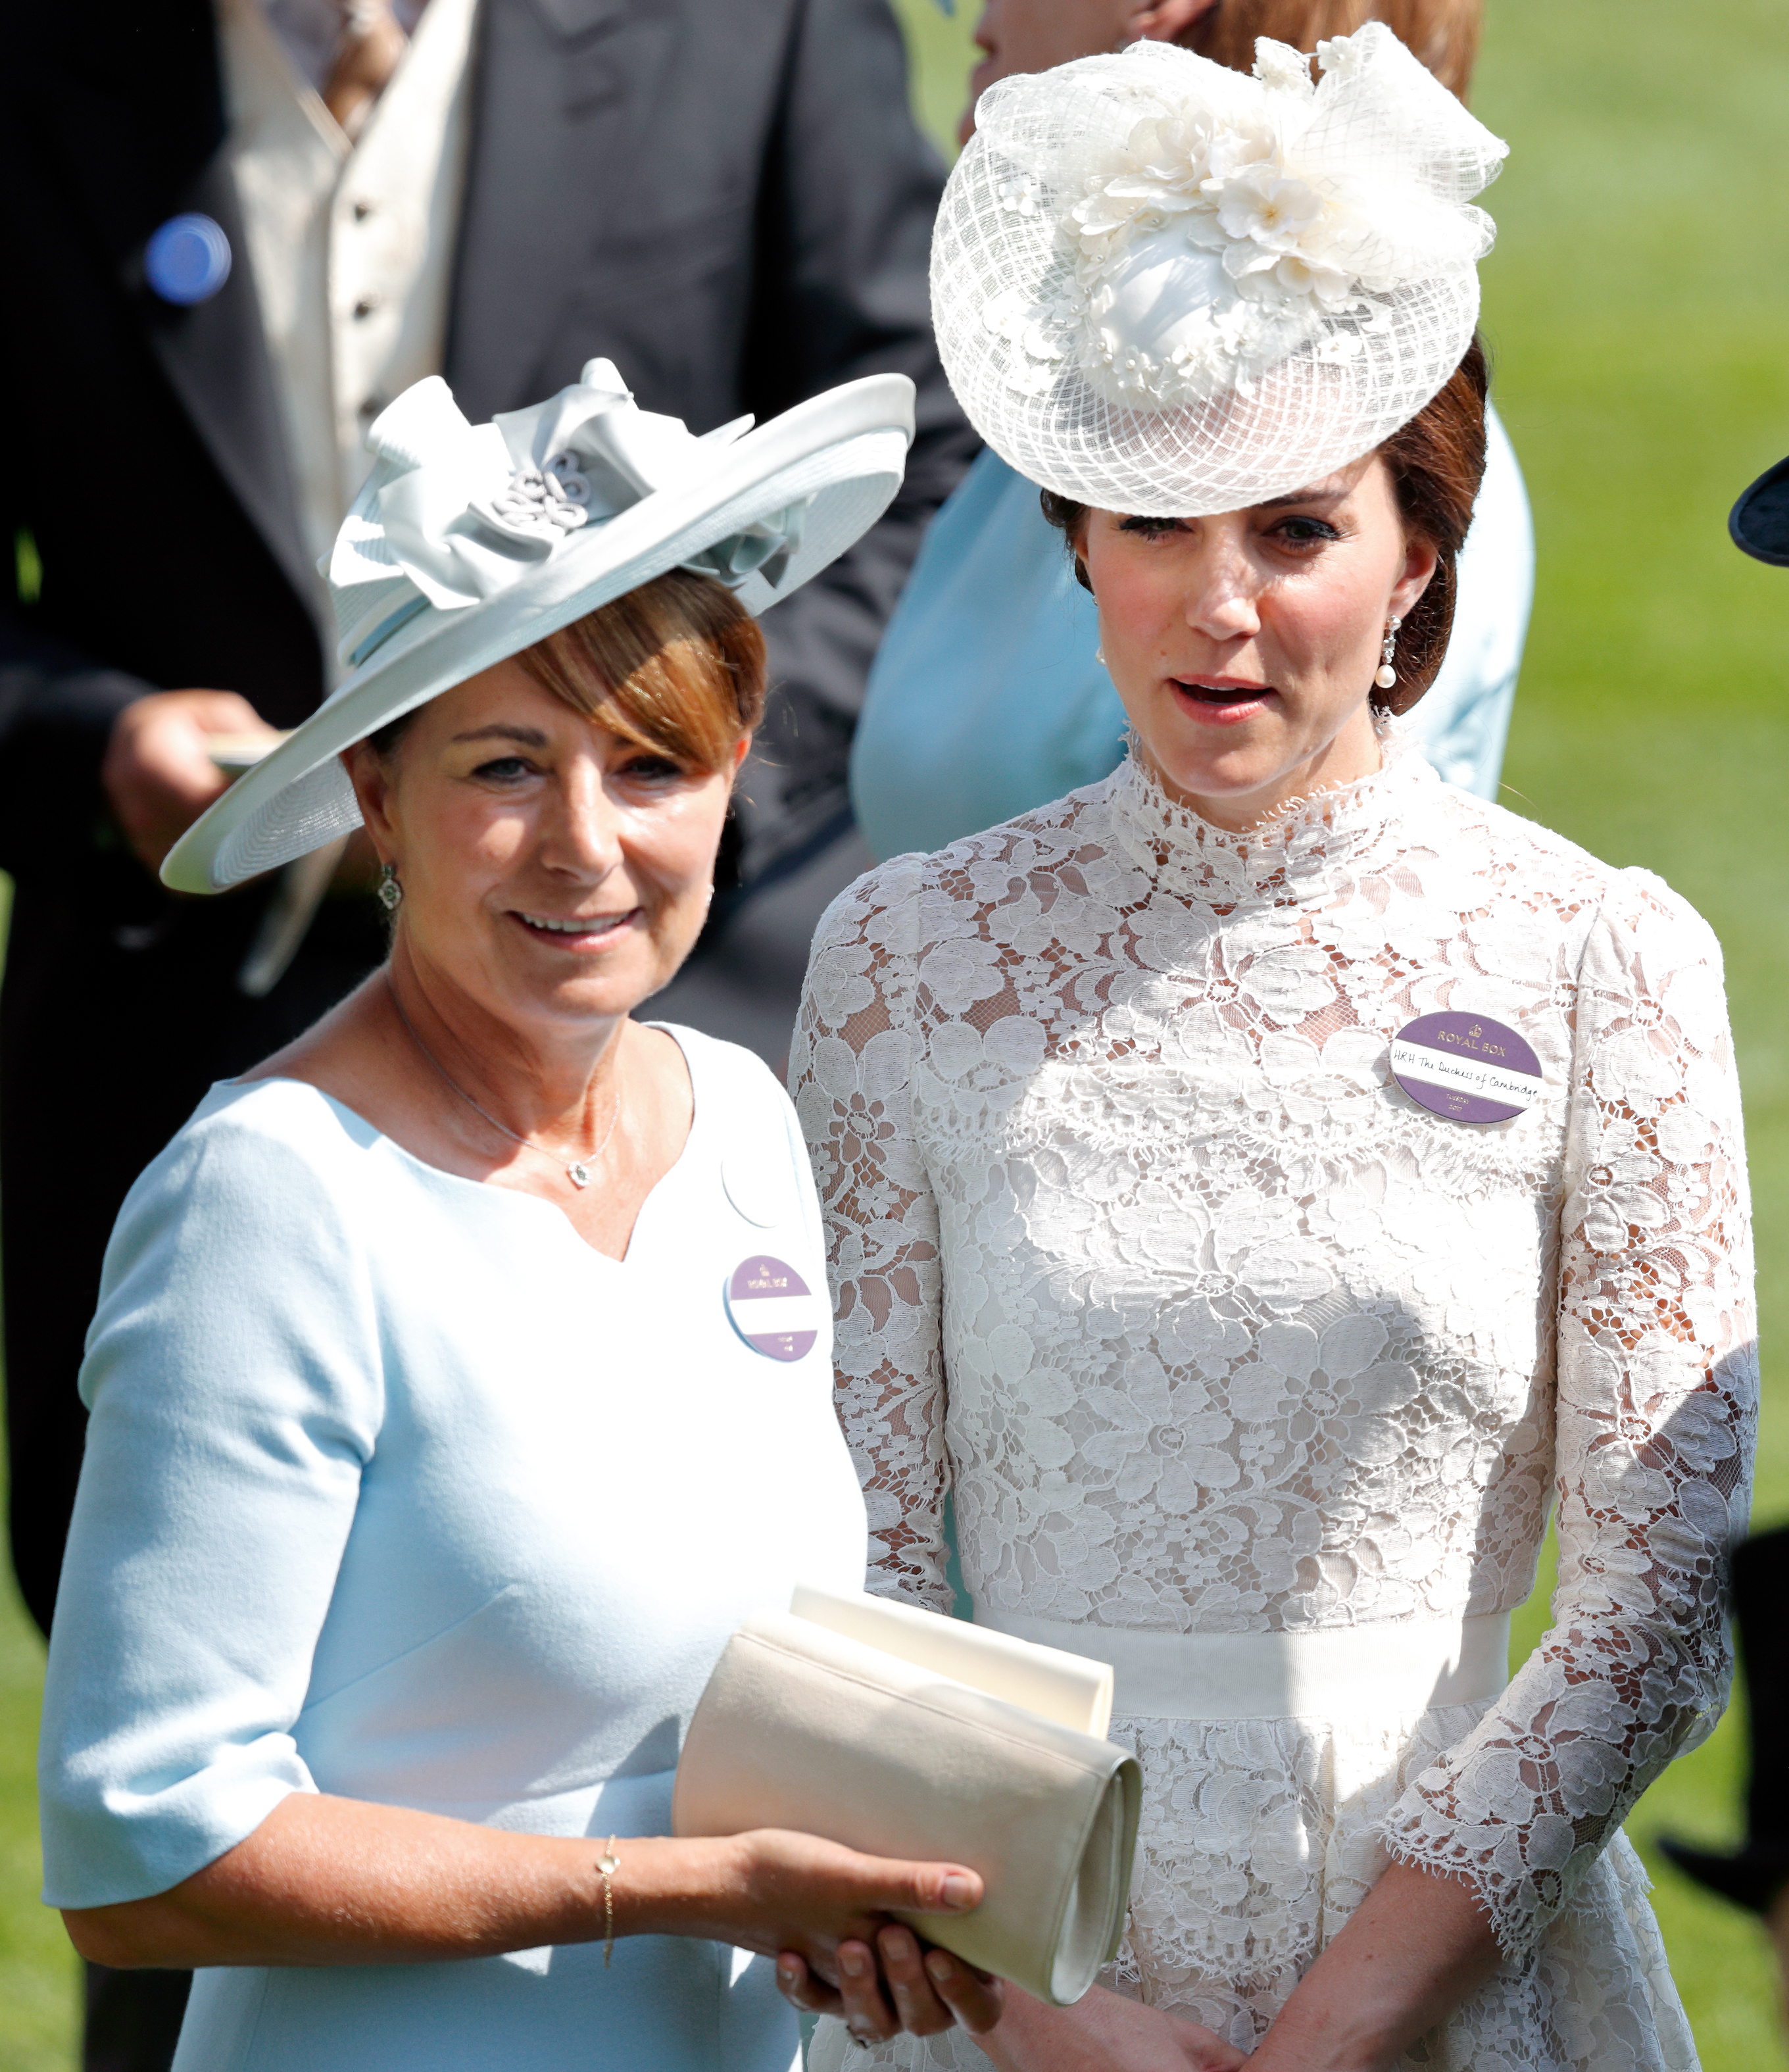 Carole Middleton and Kate Middleton, Duchess of Cambridge attend day 1 of Royal Ascot at Ascot Racecourse in England, on June 20, 2017. | Source: Getty Images